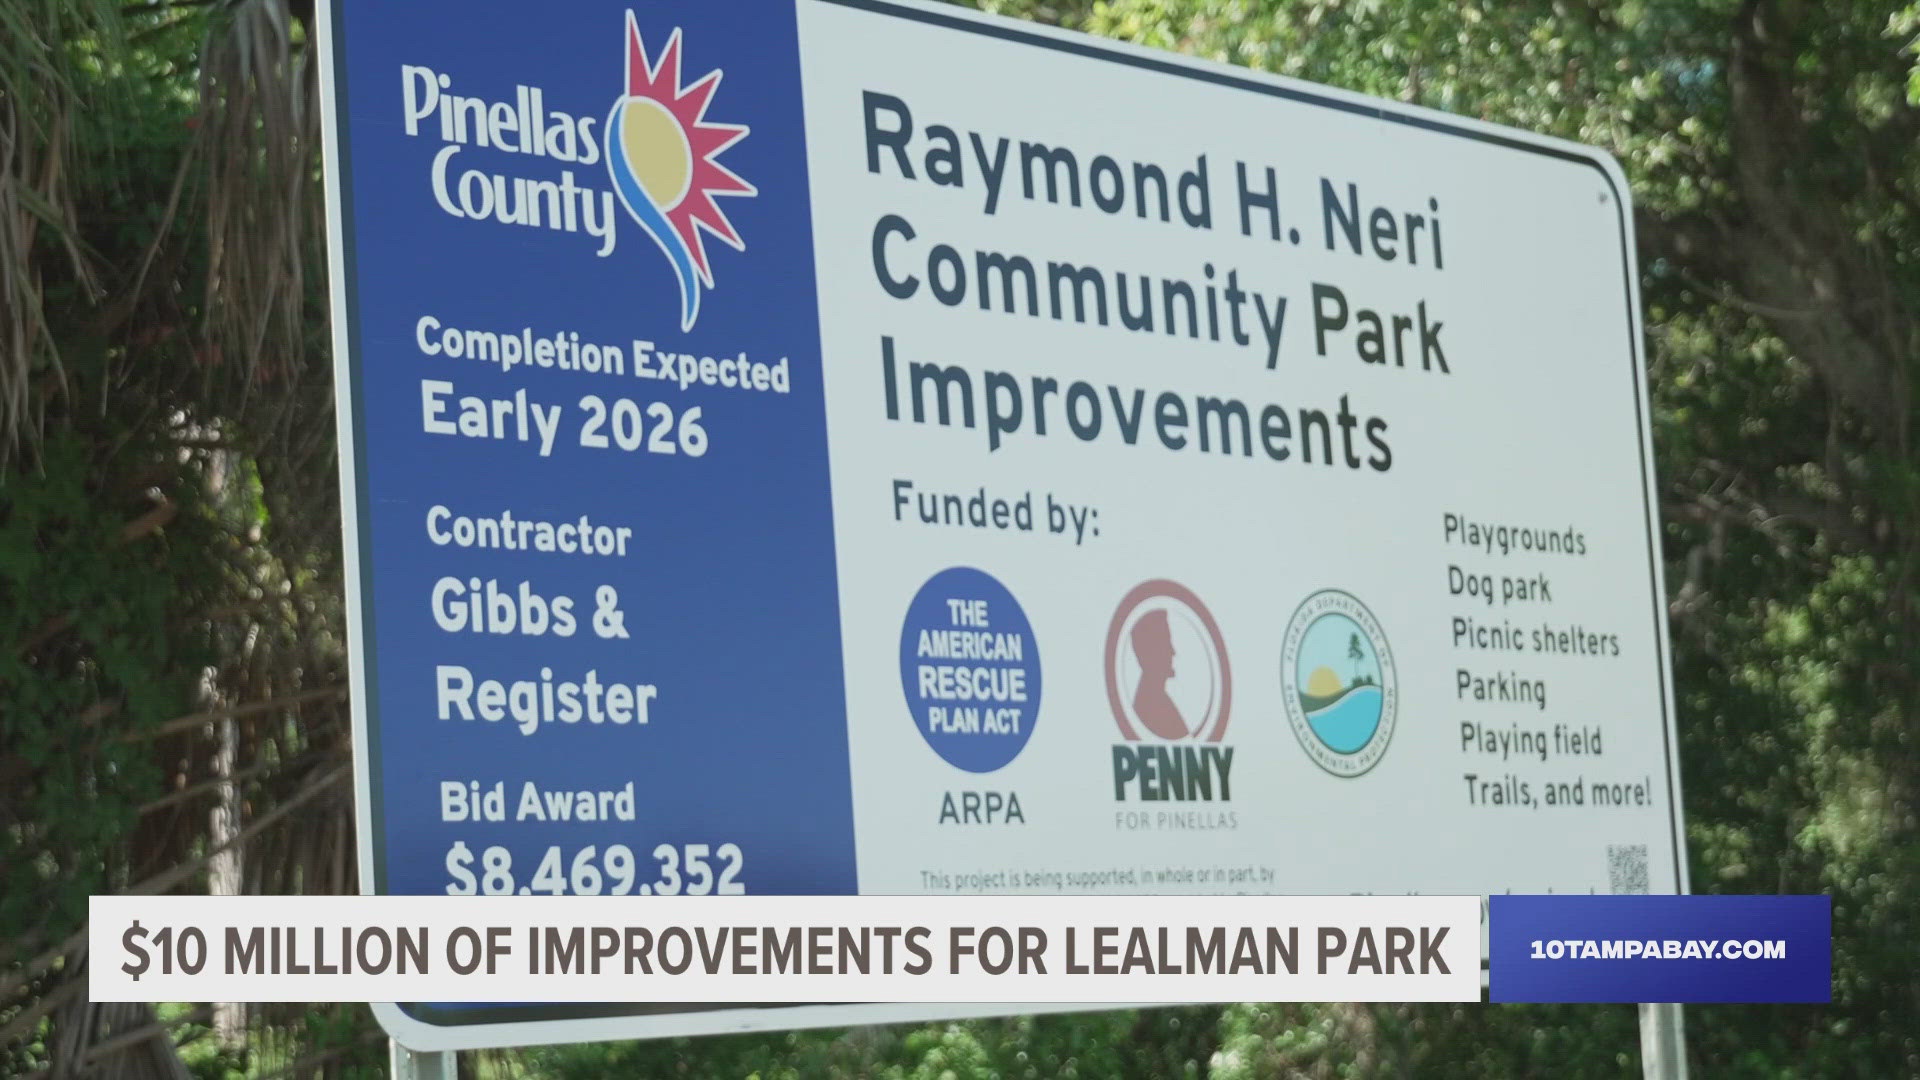 Pinellas County broke ground on the more than $10 million park improvement project that’s been discussed in the area for decades.